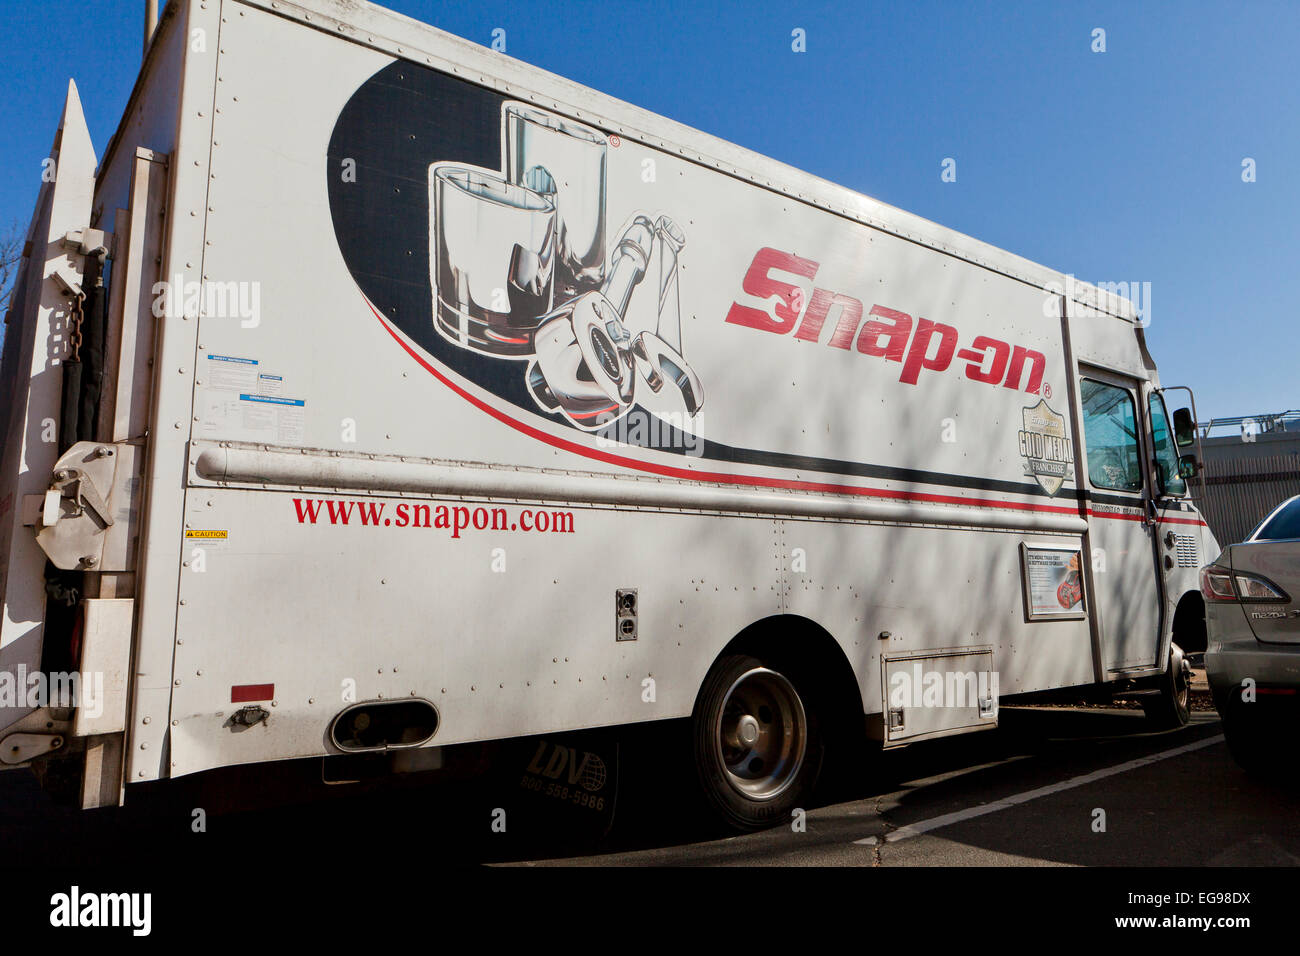 Snap-On tools mobile chariot - USA Banque D'Images